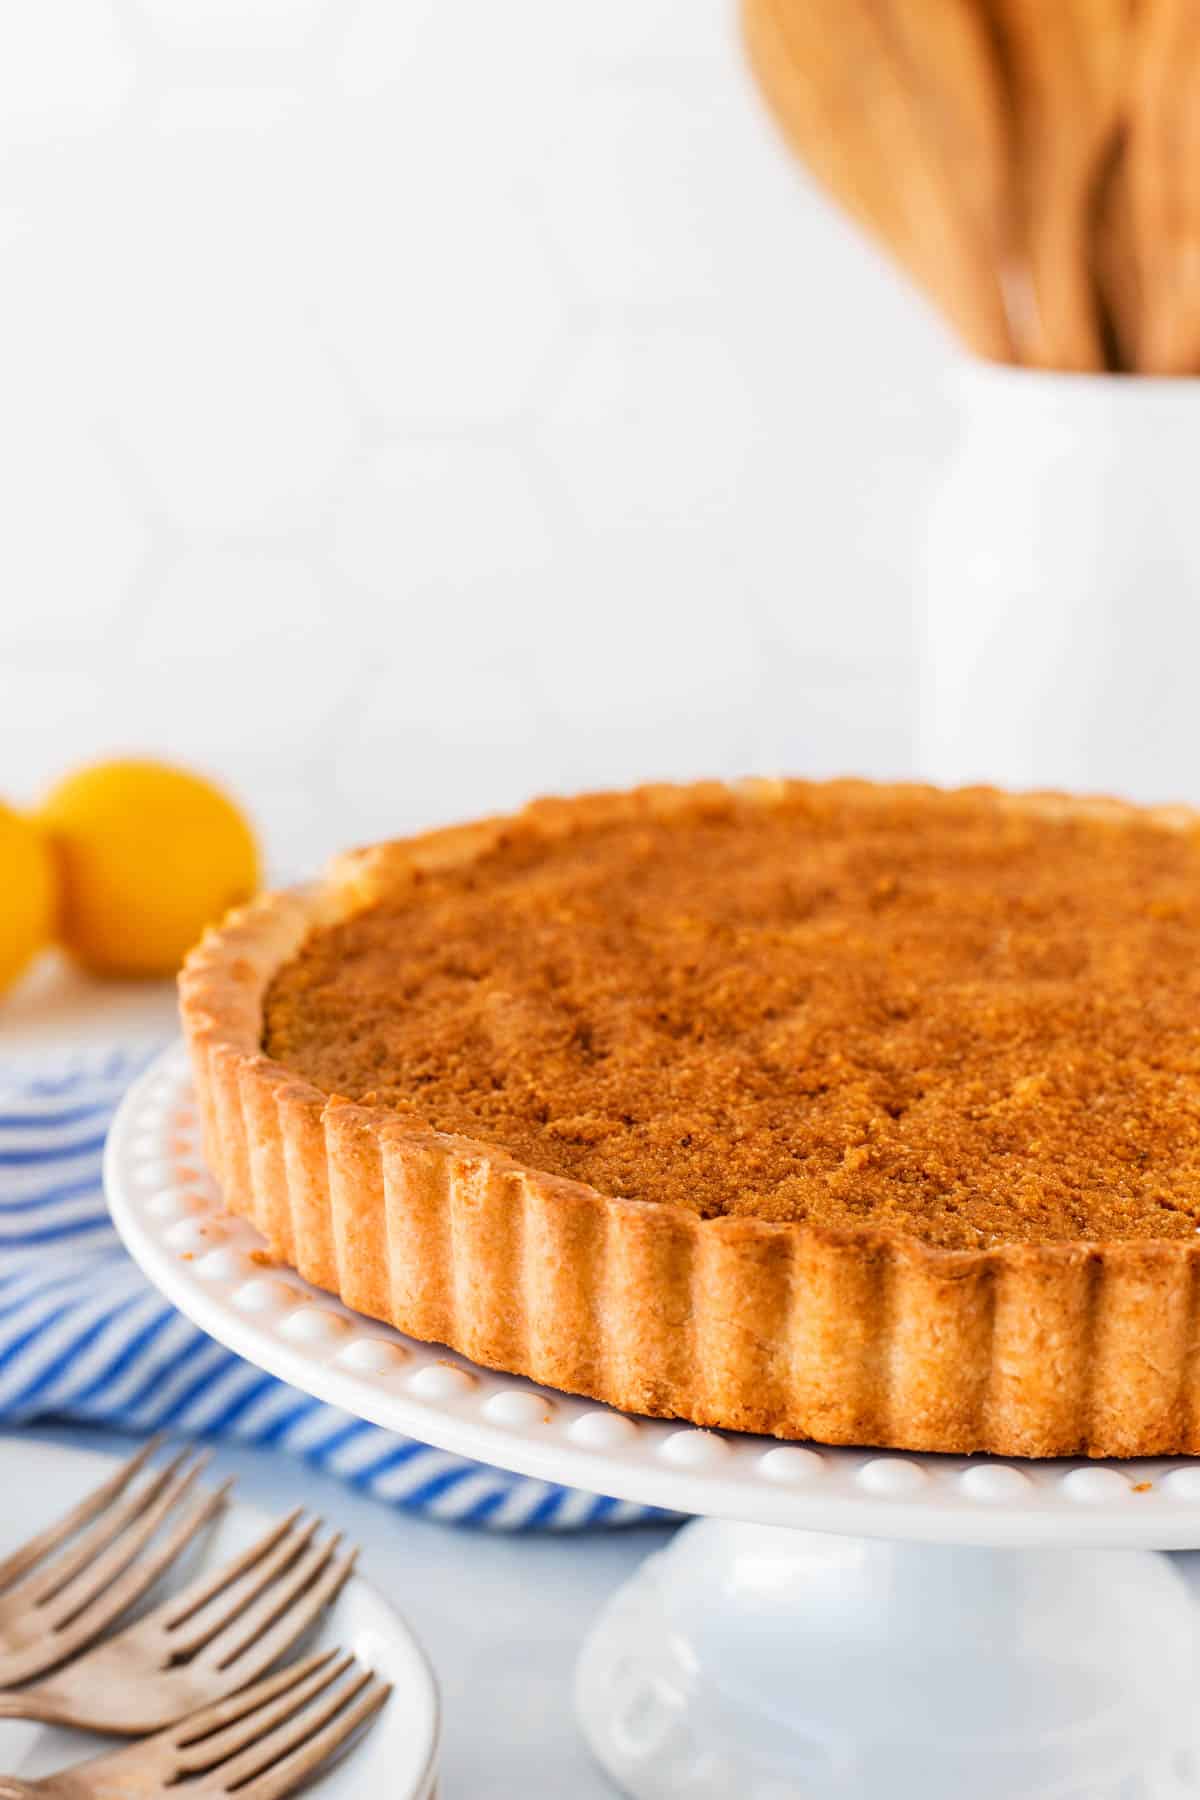 Treacle tart on a cake stand.